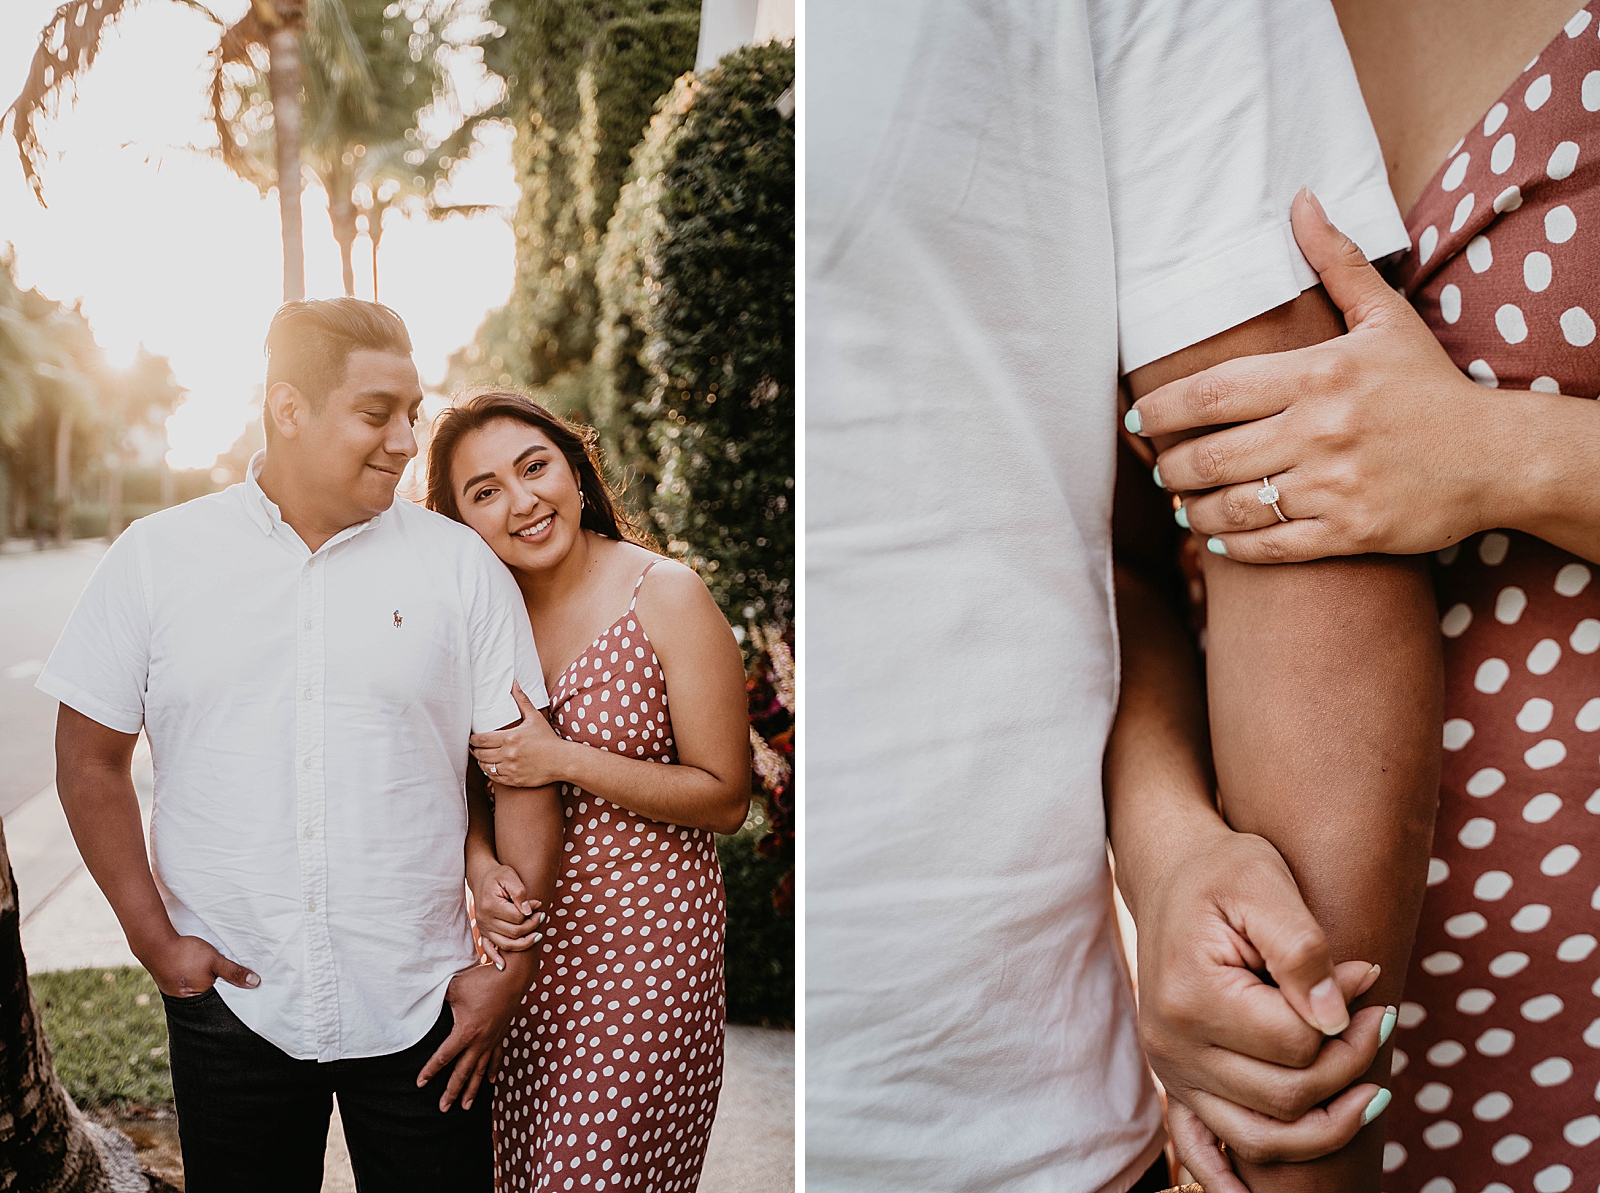 Couple standing together with woman holding man showing off engagement ring Palm Beach Island Engagement Photography captured by South Florida Engagement Photographer Krystal Capone Photography 